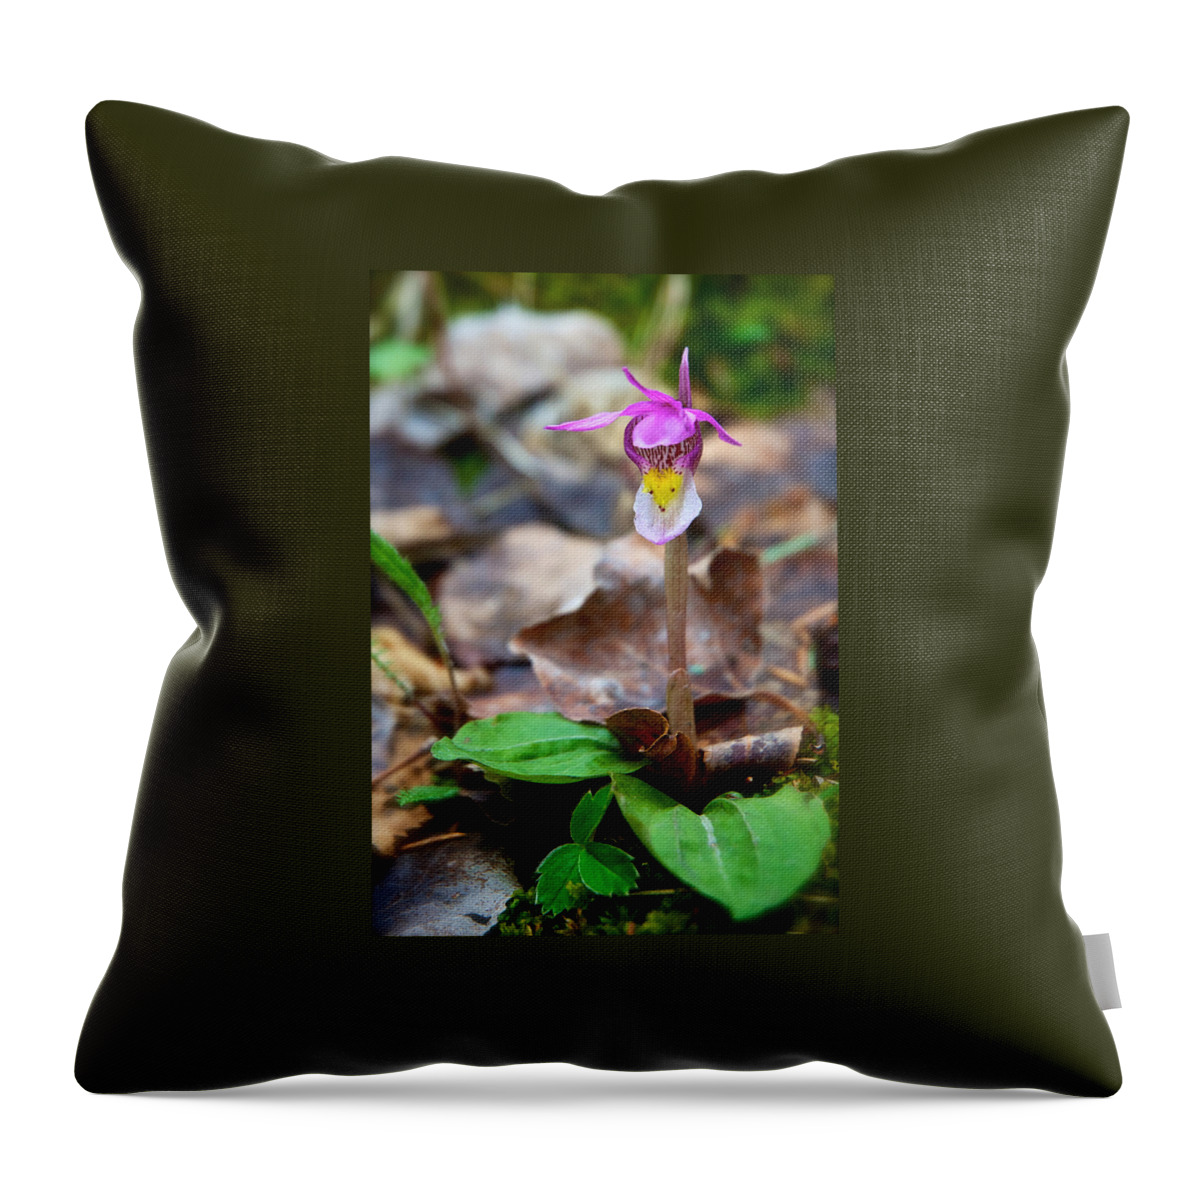 Calypso Throw Pillow featuring the photograph Fairy Slipper Orchid by Mary Lee Dereske